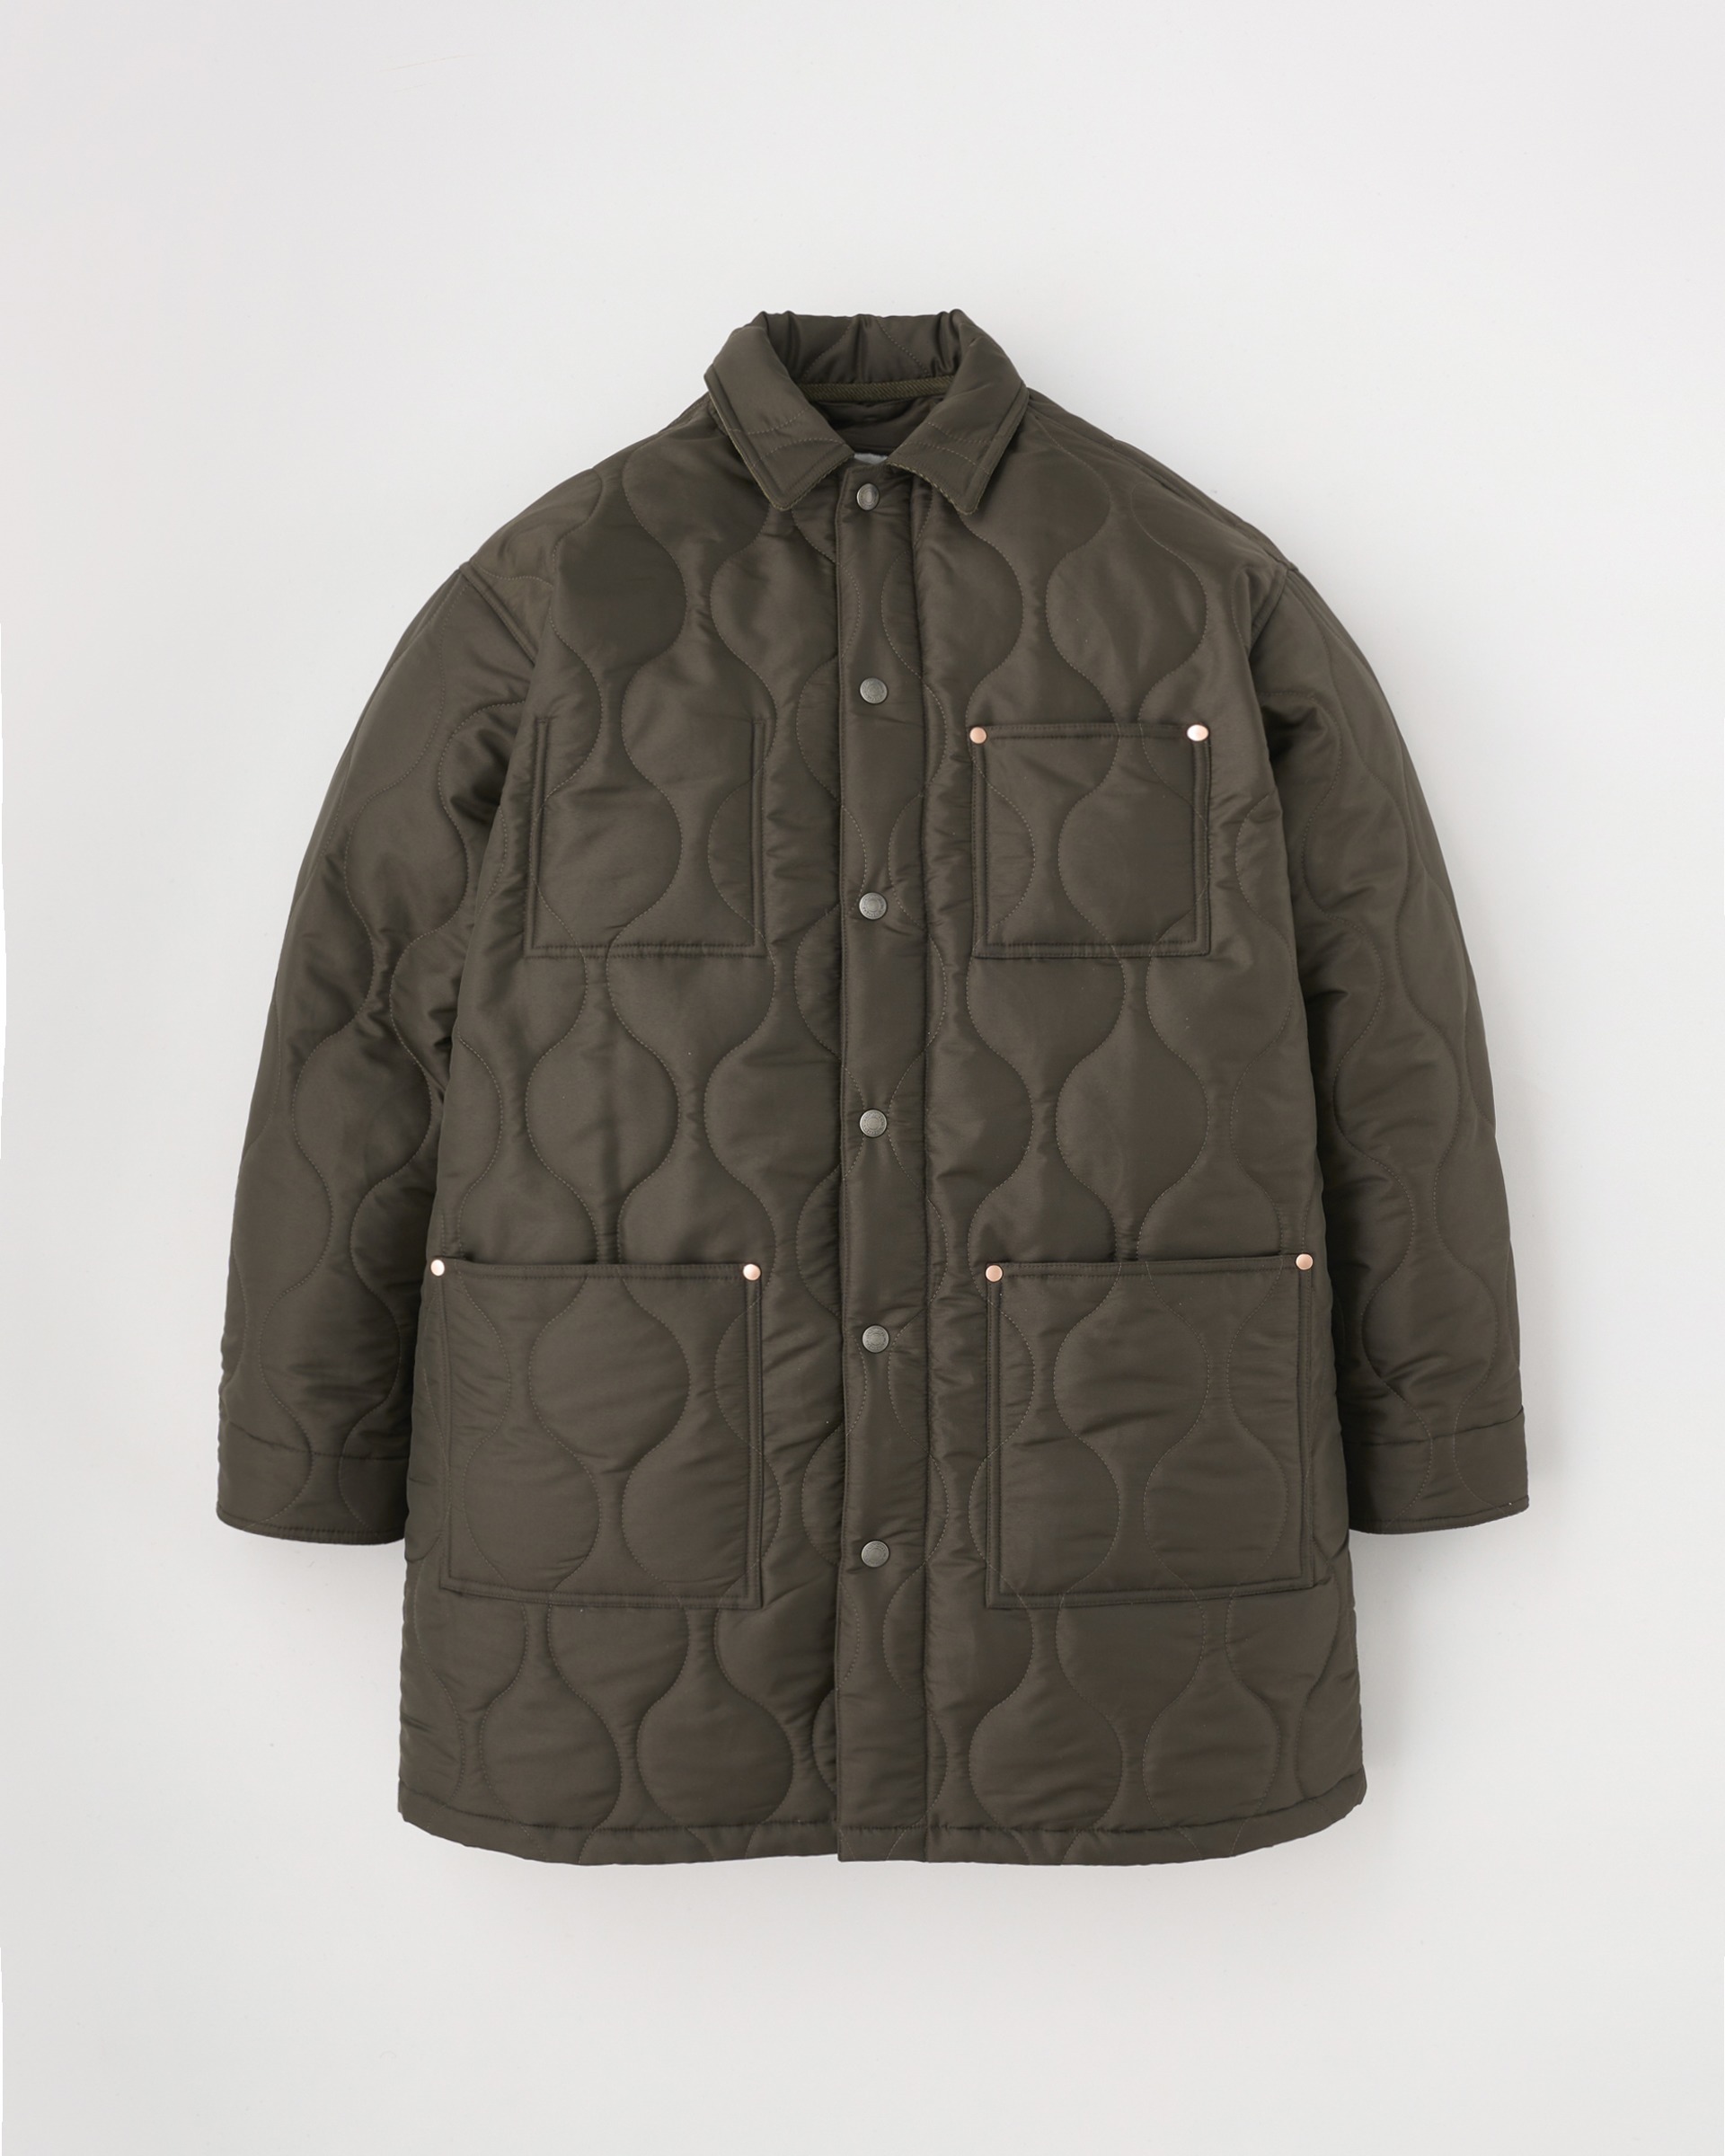 【UNIONWEAR】QUILTED JACKET 003(505673619